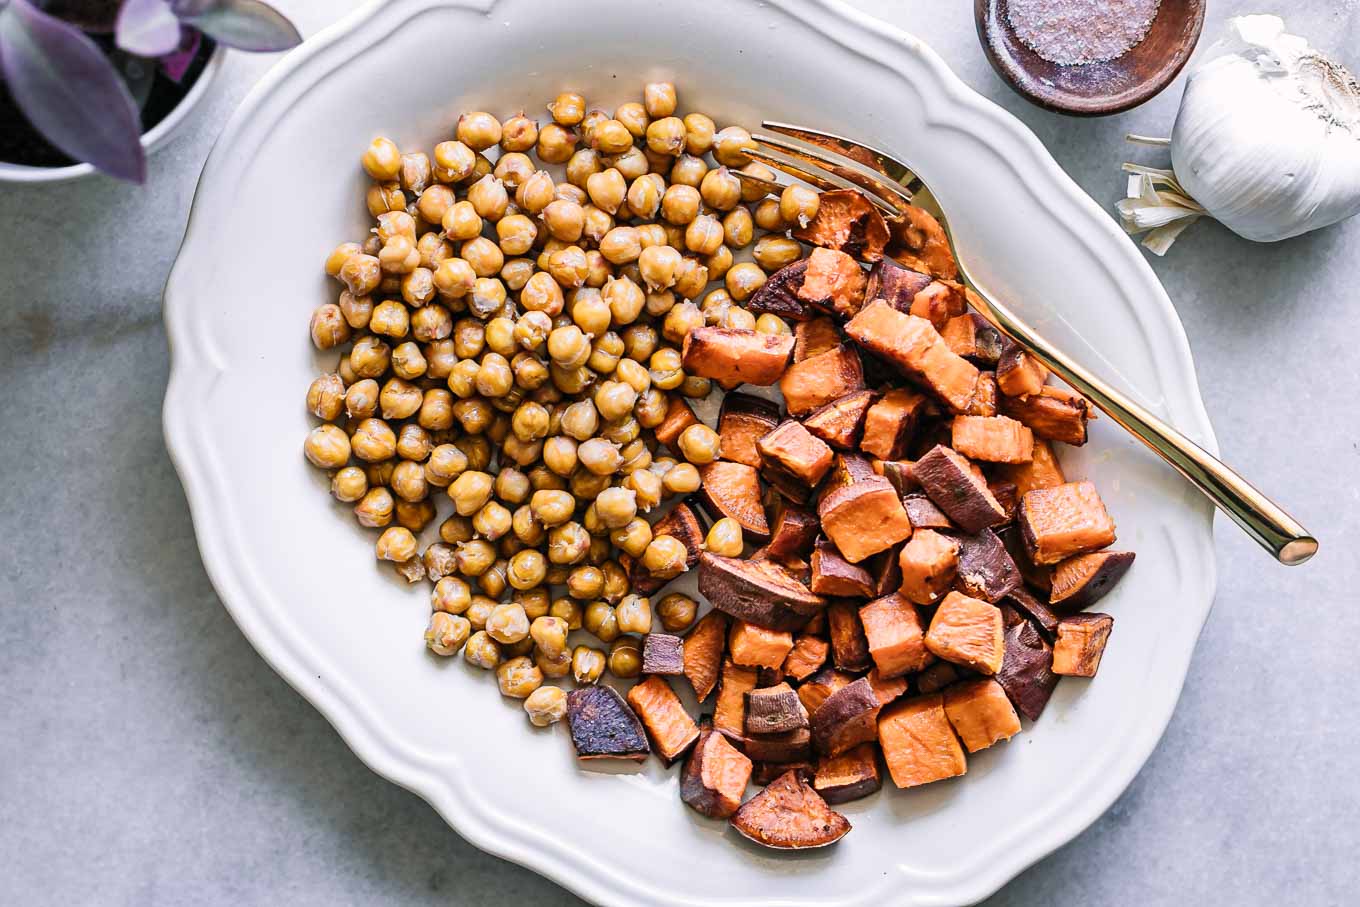 baked sweet potatoes and chickpeas on a white plate with a gold fork